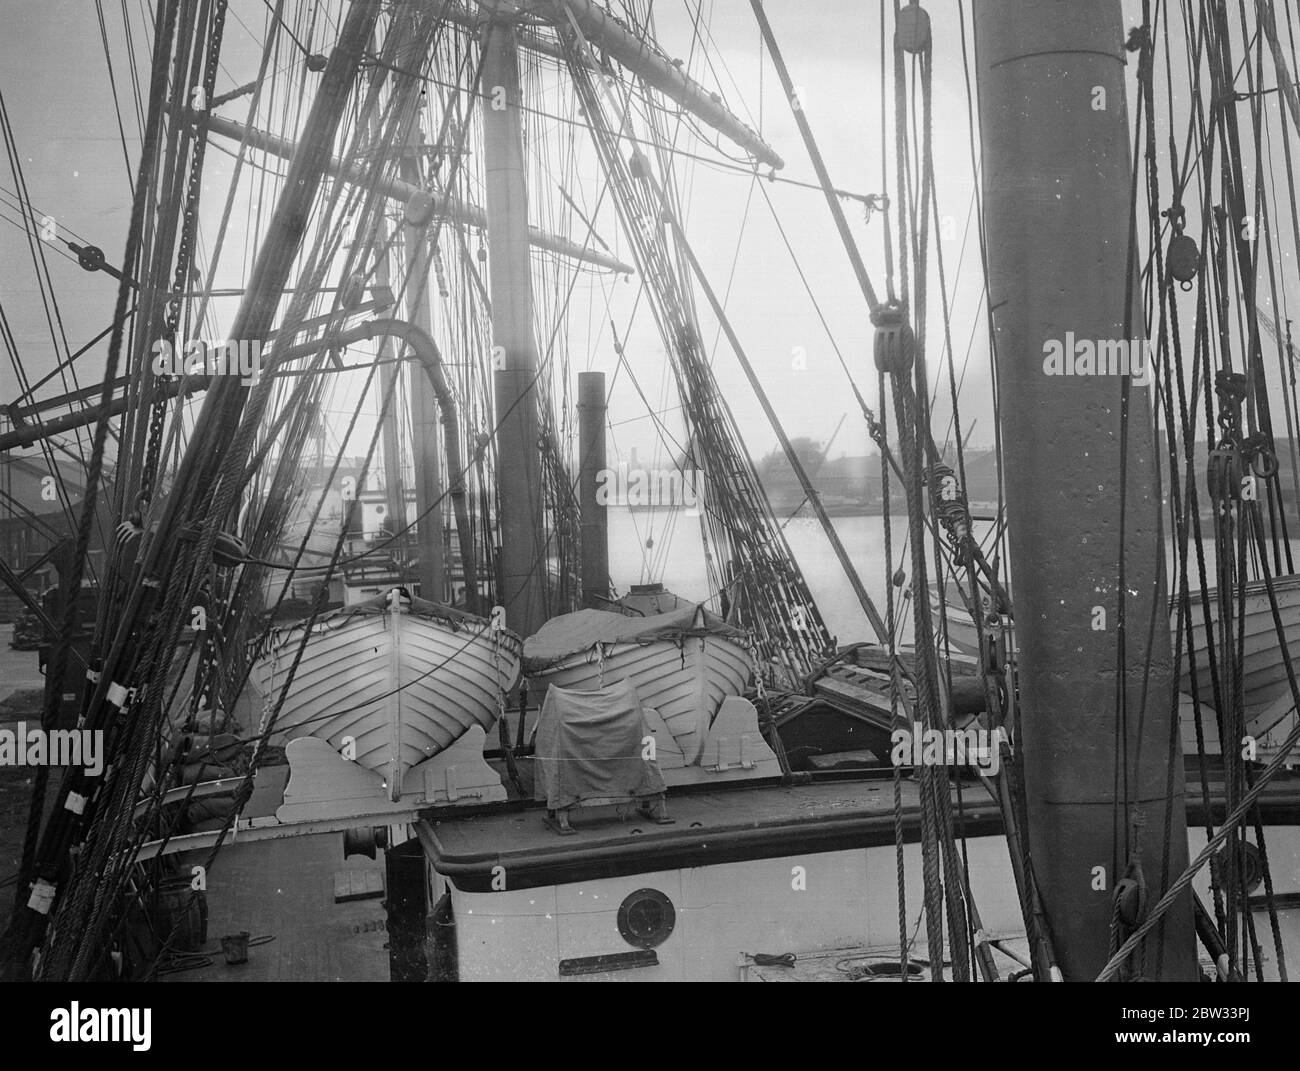 Olivebank a forest of spars and ropes in the Thames . A forest of Spars and ropes , in the Thames , as the four masted barque Olivebank which has just arrived at Mill Wall Dock , in the Thames with grain is unloaded . 15 August 1932 . Stock Photo